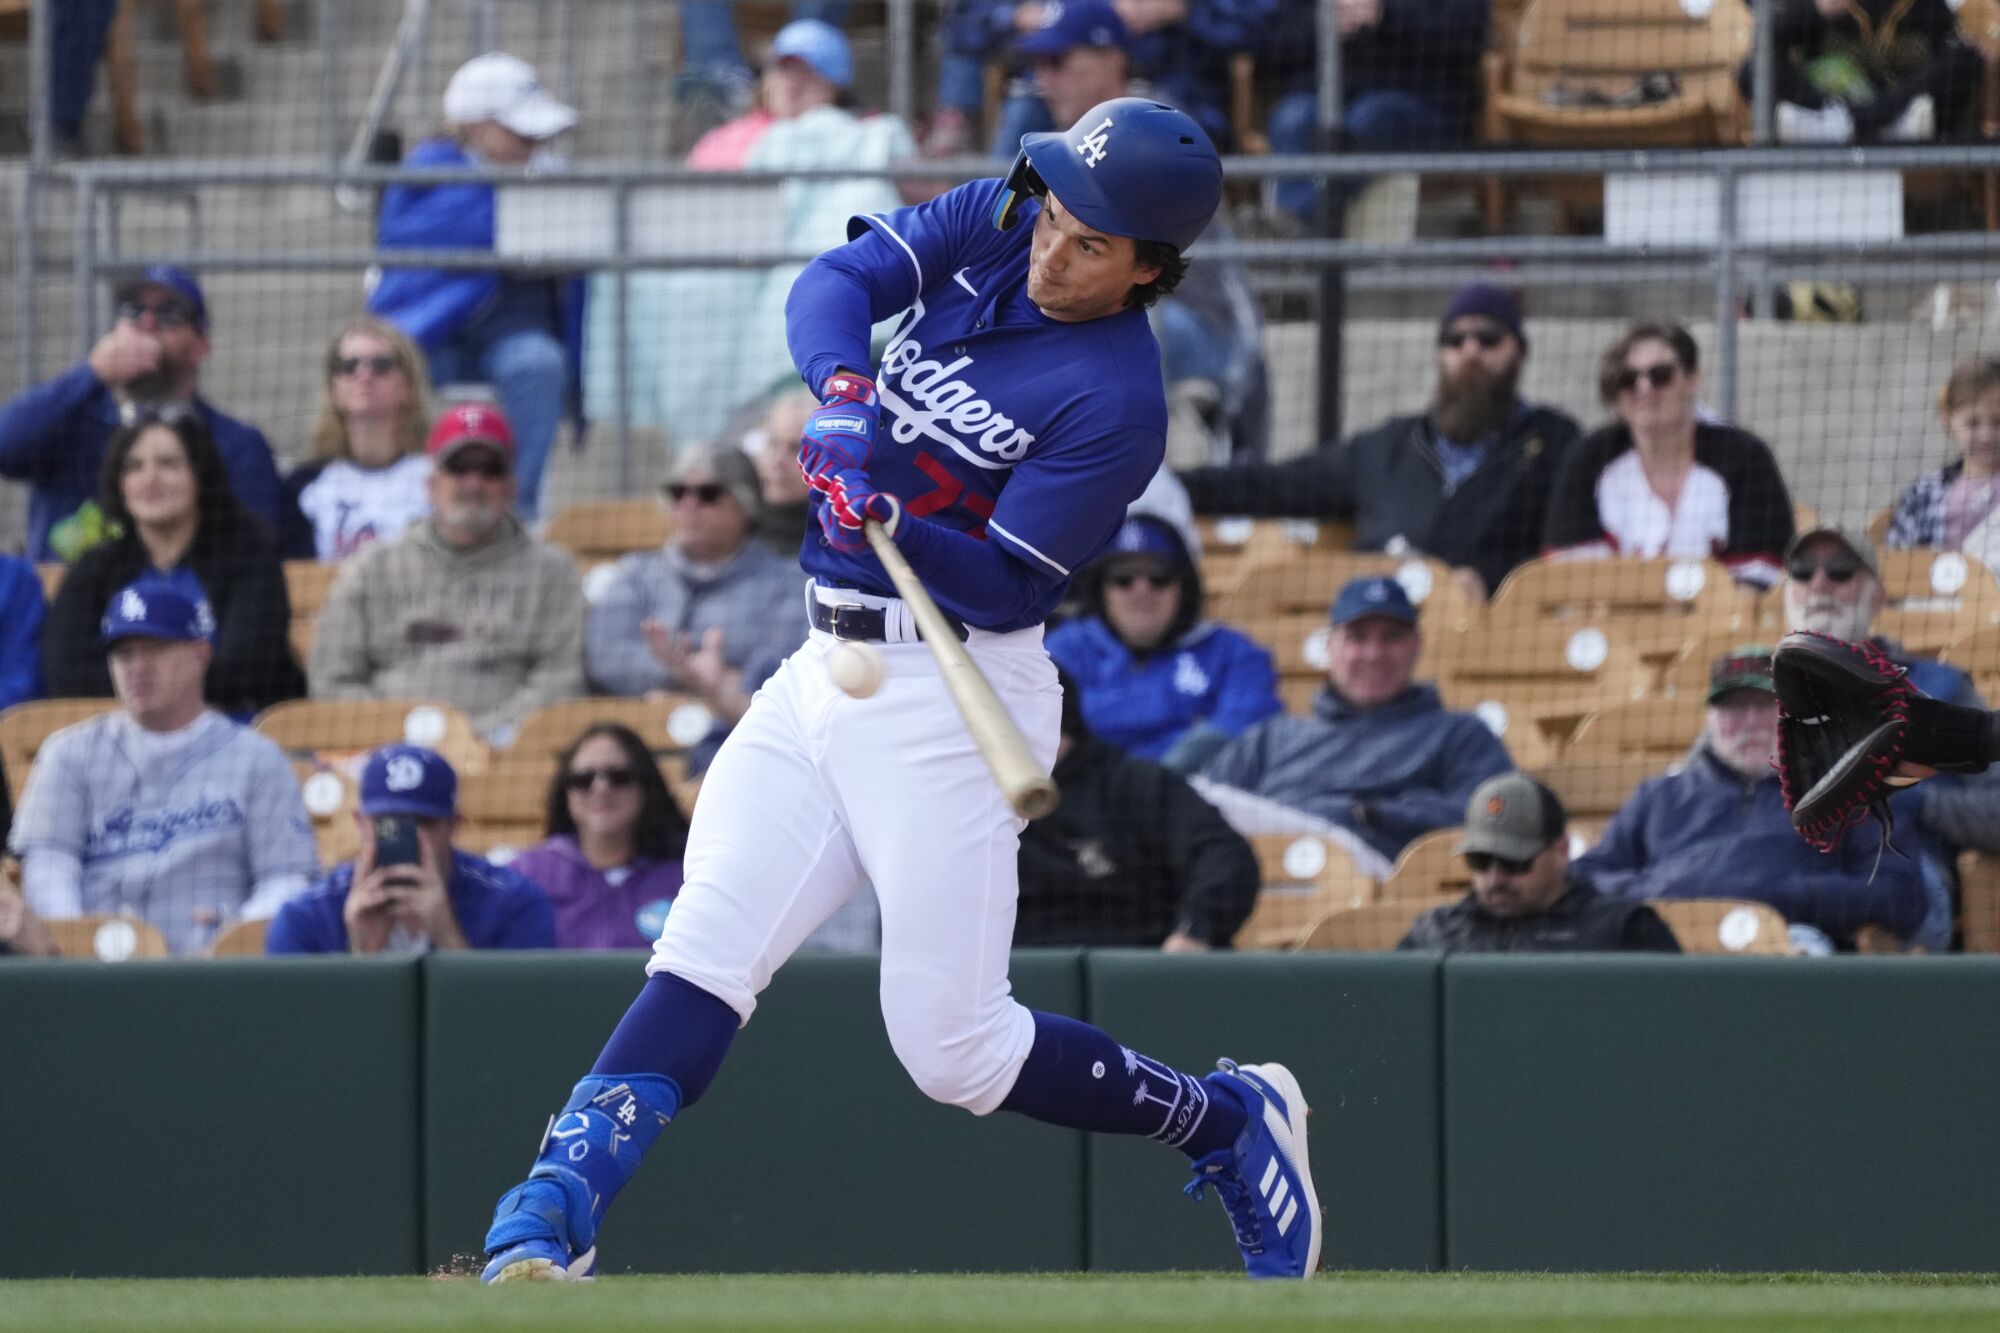 James Outman connects for a single during a Dodgers spring training game.